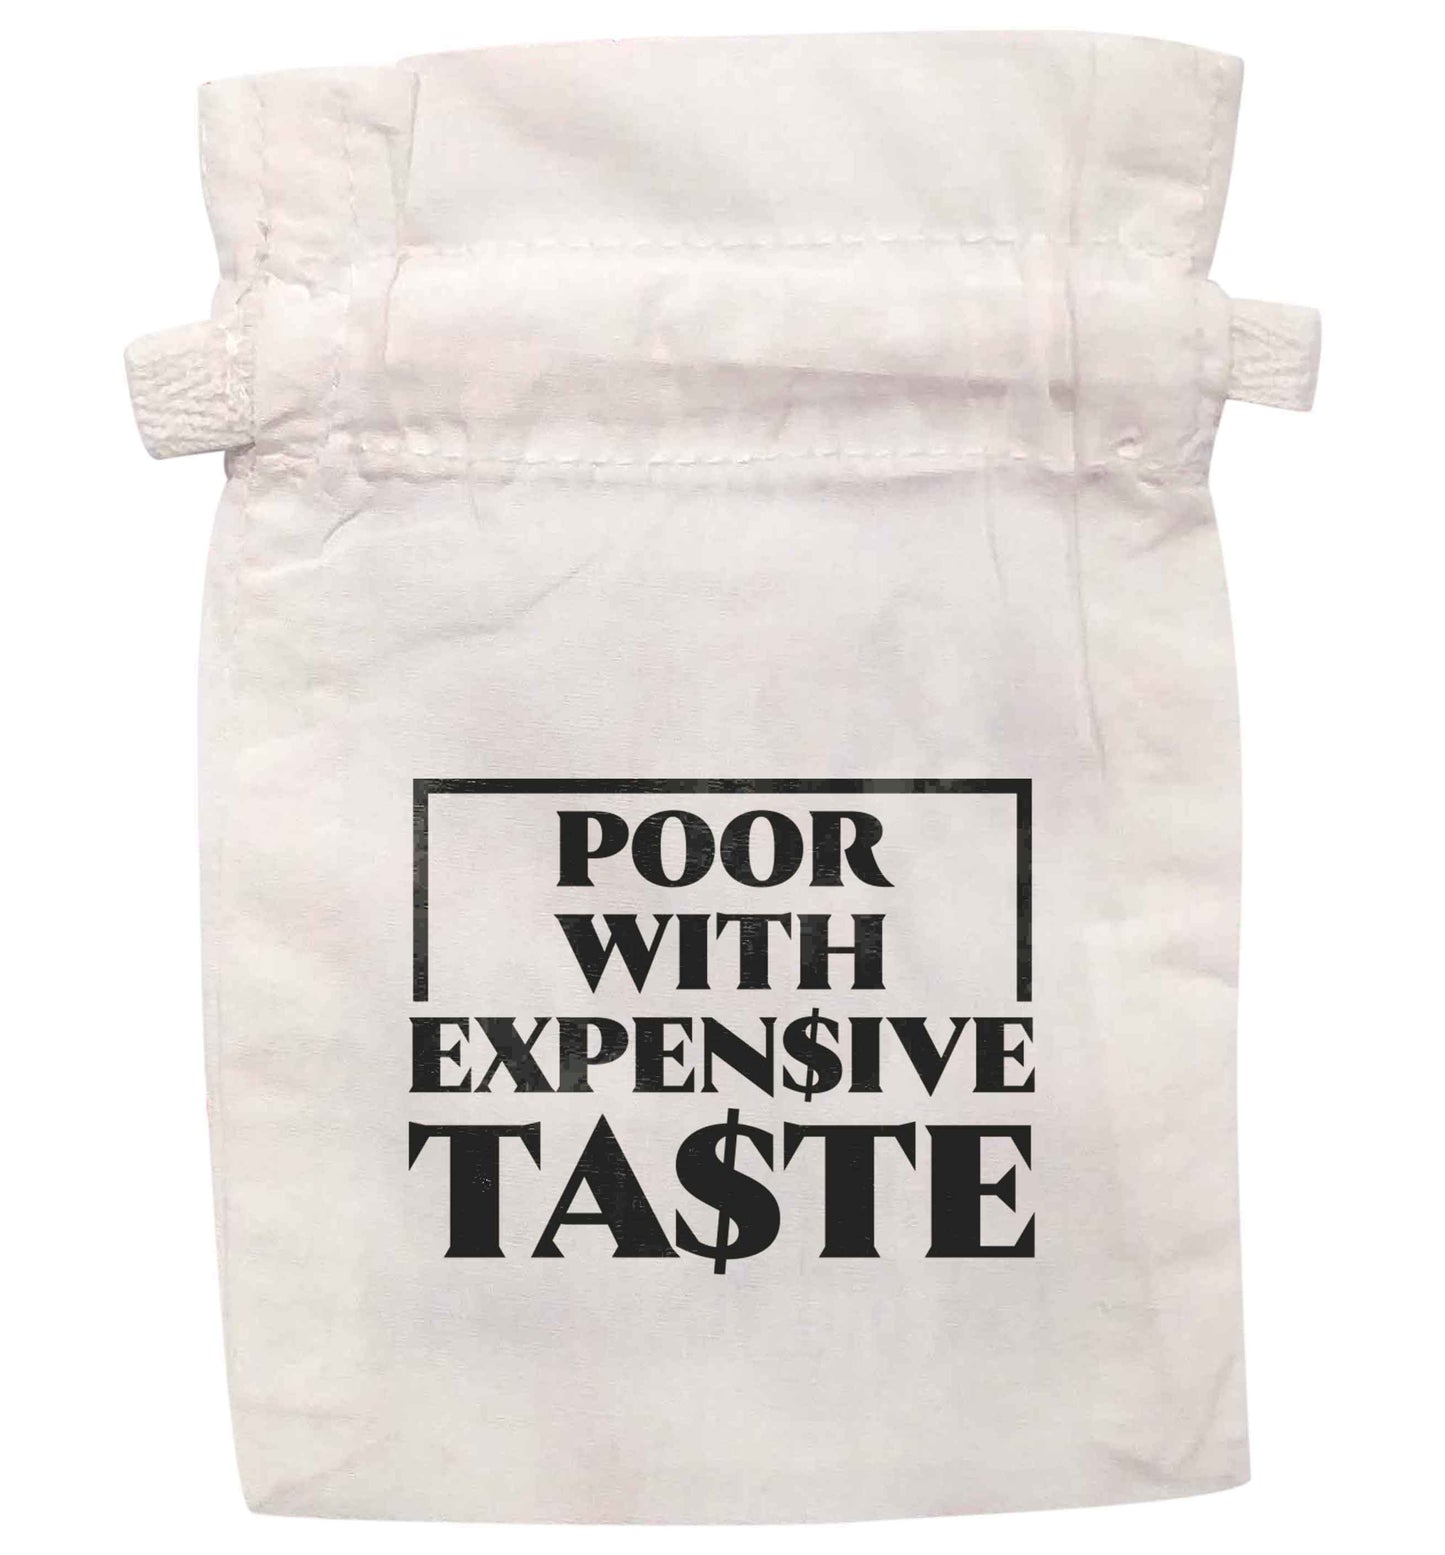 Poor with expensive taste | XS - L | Pouch / Drawstring bag / Sack | Organic Cotton | Bulk discounts available!